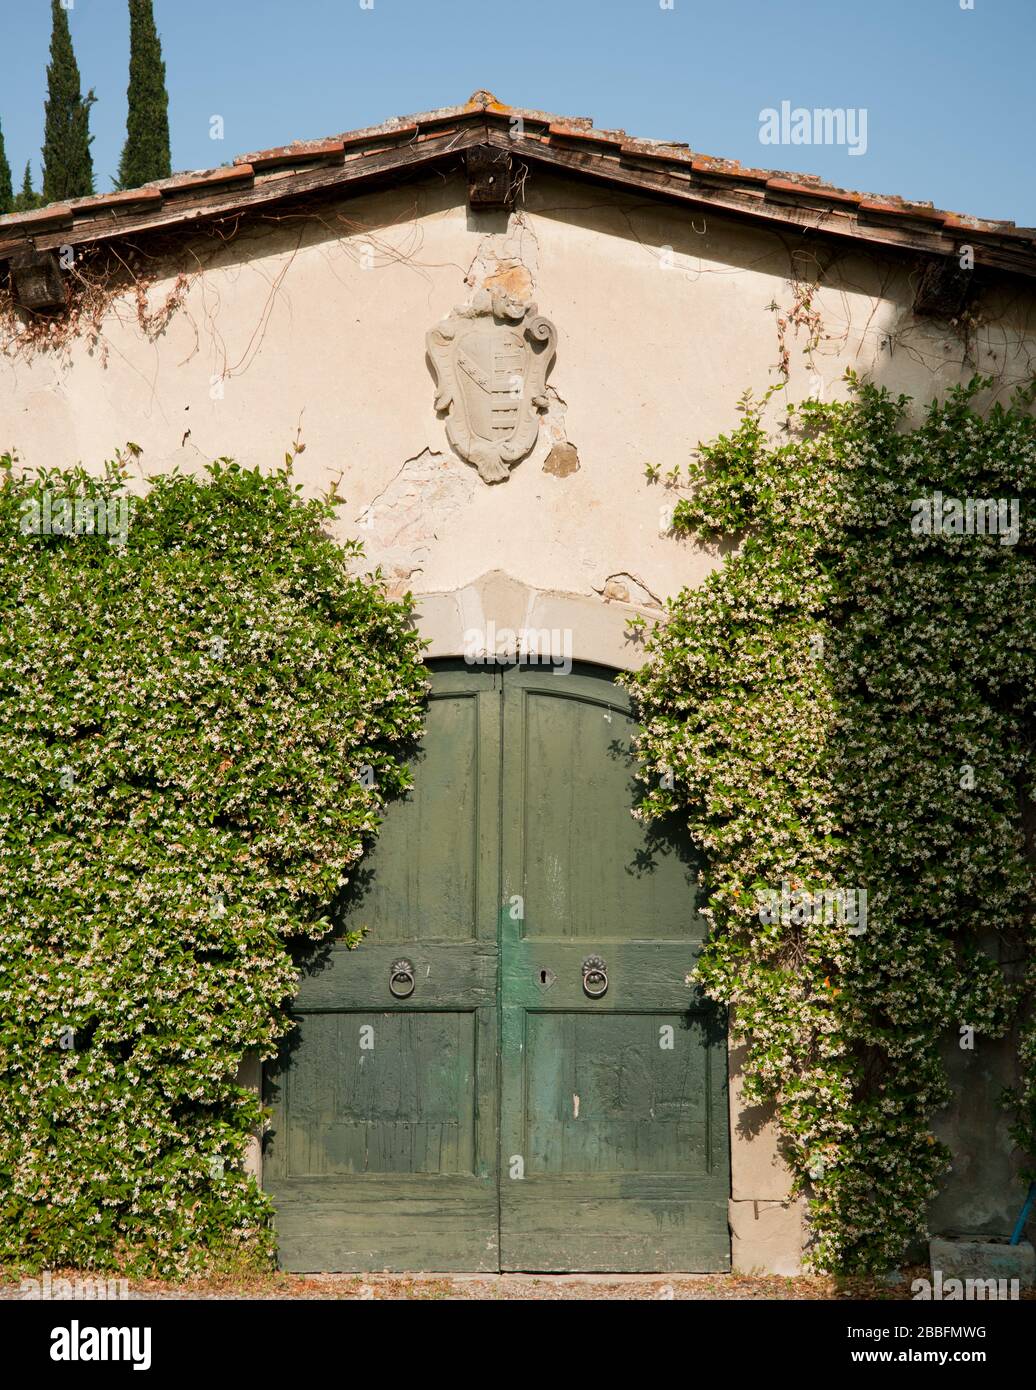 shed with green double wing doors and coat of arms, Tuscany, Italy Stock Photo